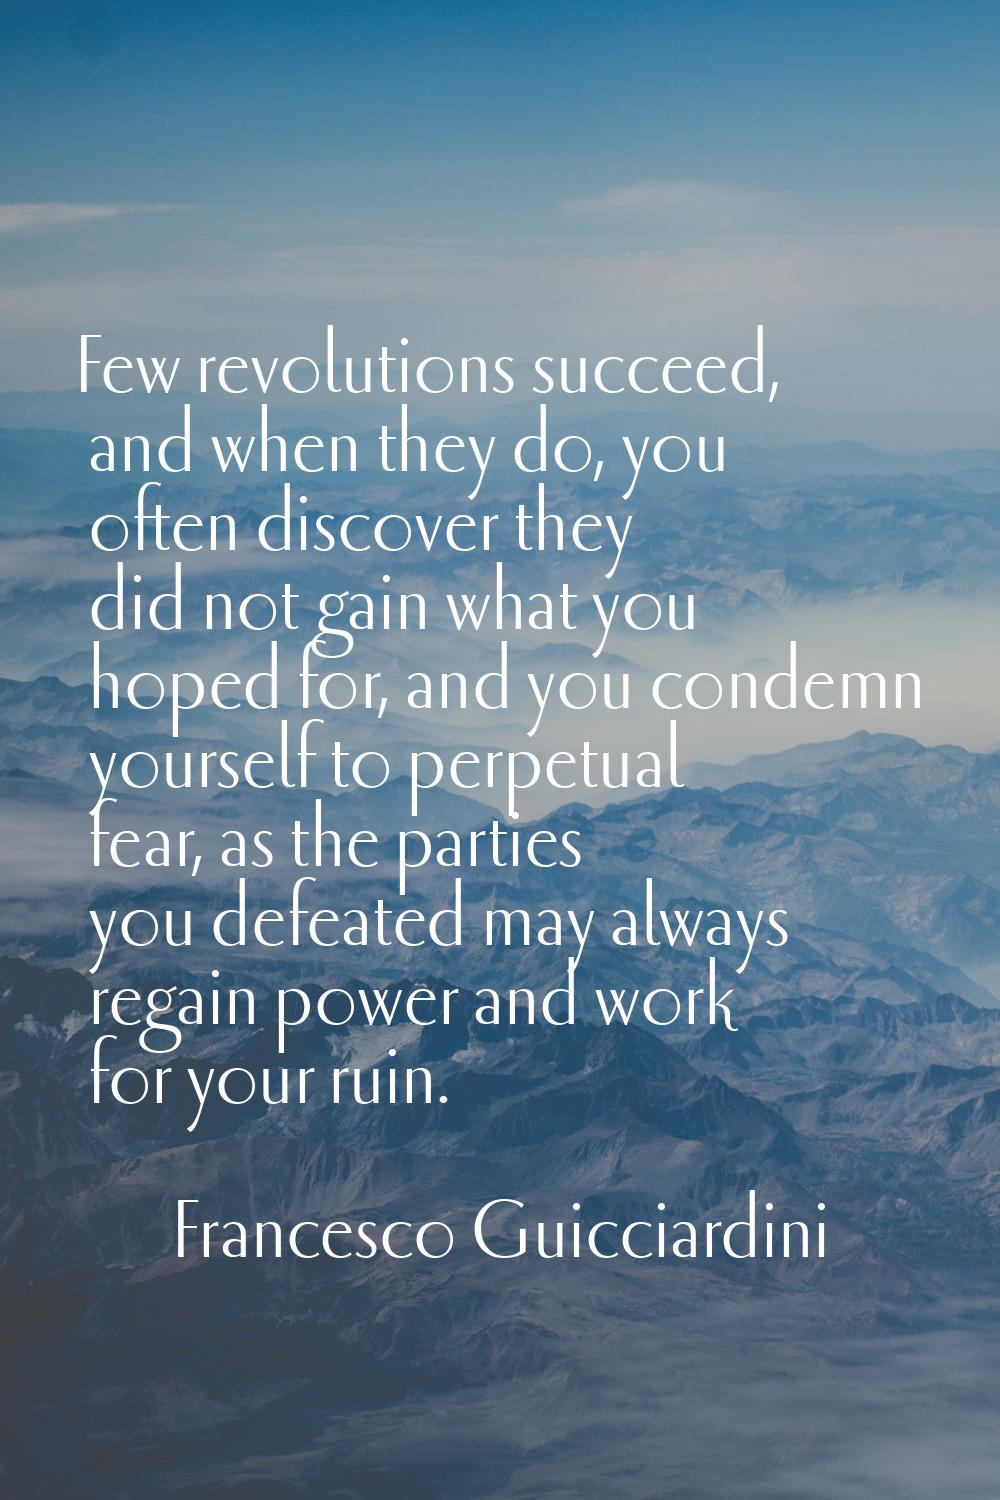 Few revolutions succeed, and when they do, you often discover they did not gain what you hoped for,